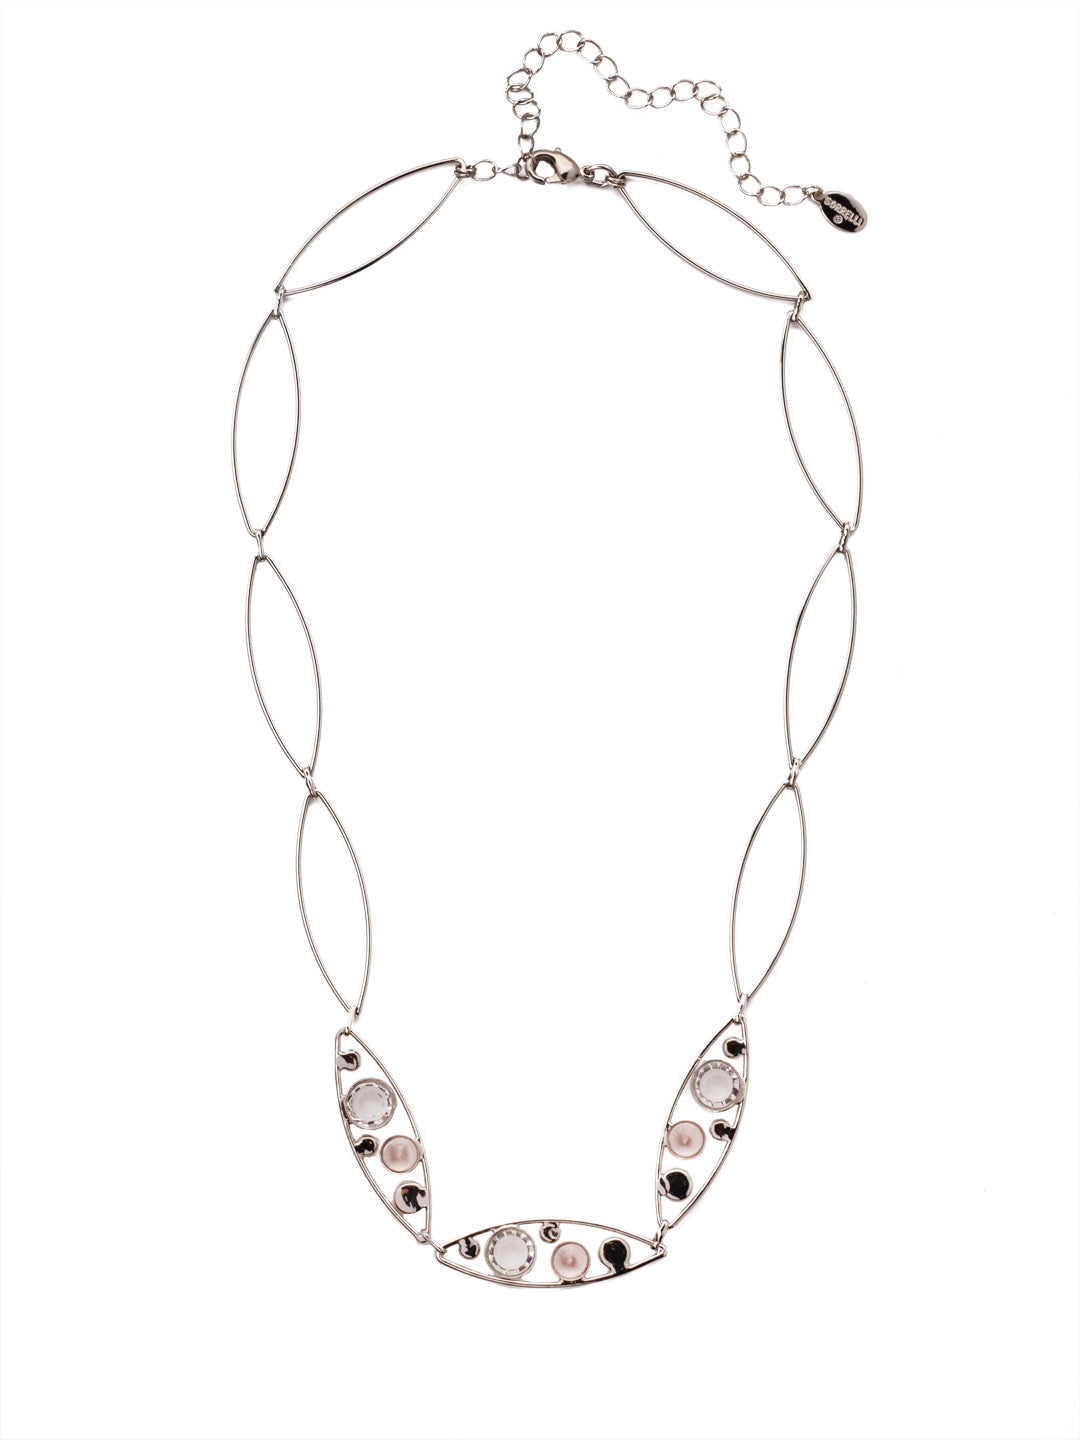 Charlene Triple Tennis Necklace - NFC52PDSNB - <p>The Charlene Triple Tennis Necklace combines oblong metal hoops and delicate crystal channels to create a gorgeous twist on the classic tennis necklace. From Sorrelli's Snow Bunny collection in our Palladium finish.</p>